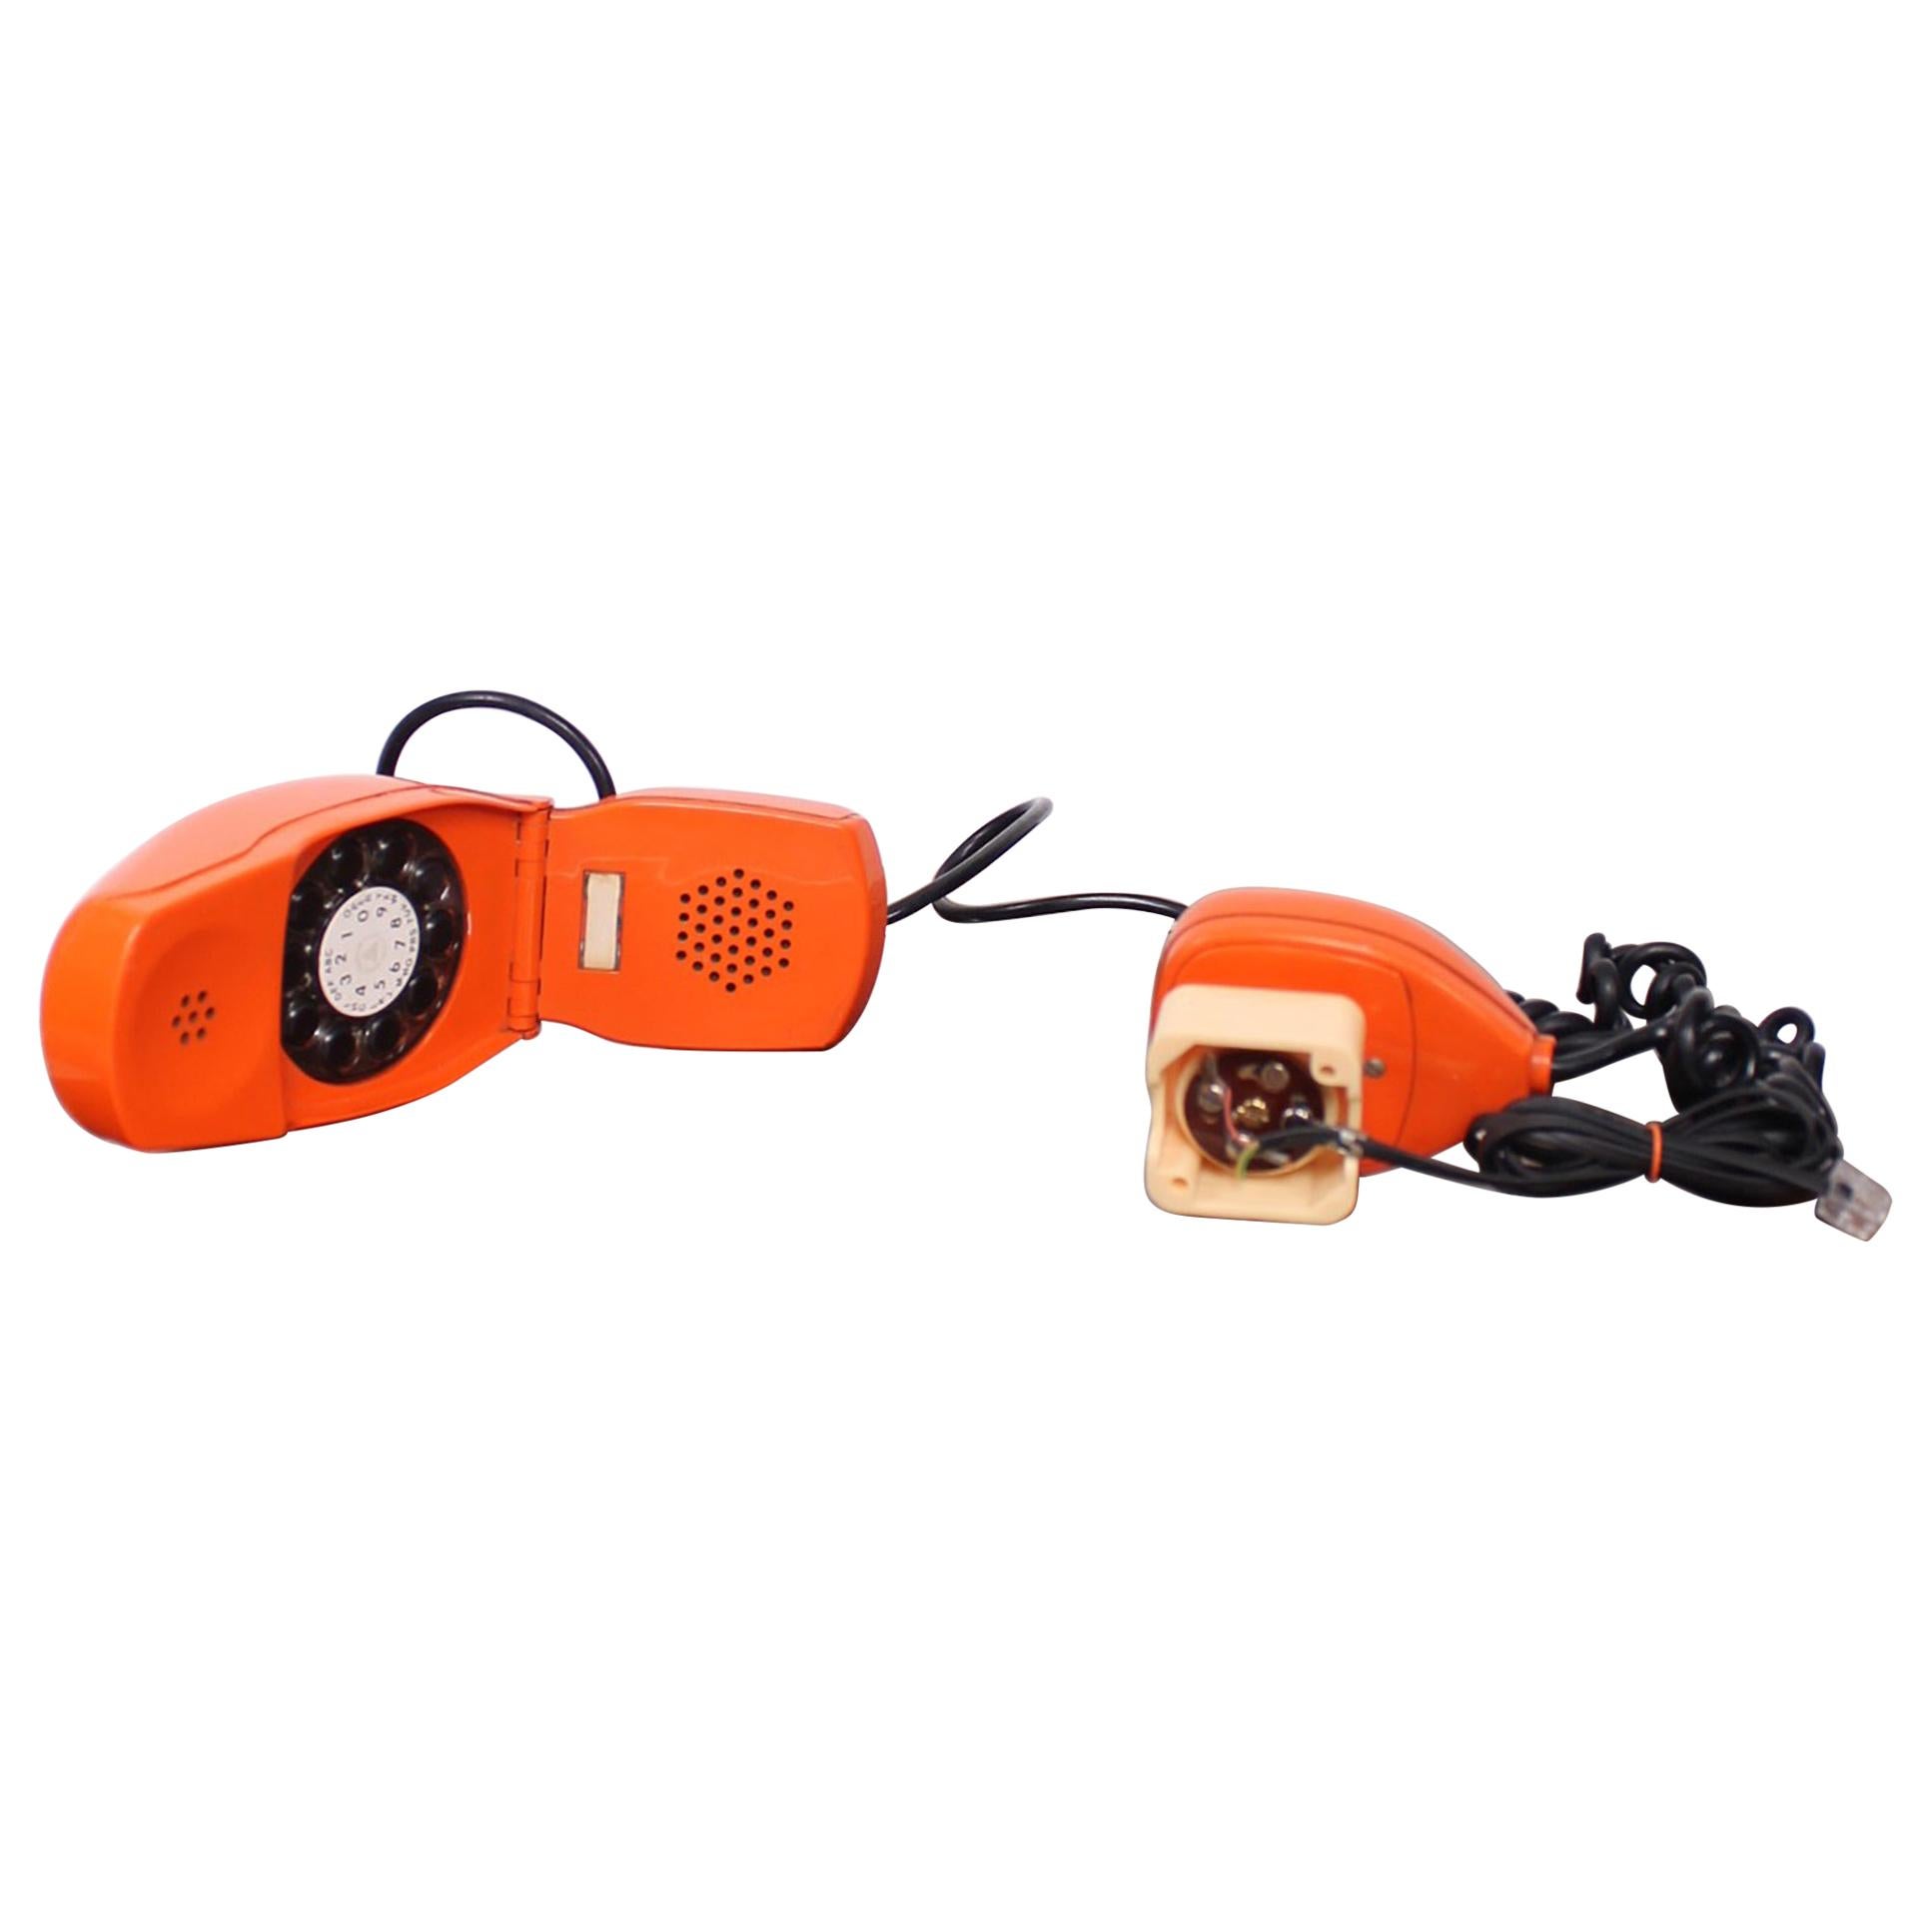 Fun Orange Flip Phone Rotary Dial
MoMA Modern Italian orange Grillo folding rotary telephone launched in 1966 by Marco Zanuso & Richard Sapper. The telephone was manufactured in Italy by Siemens. Vintage Rotary Phone. Revolutionary design for the